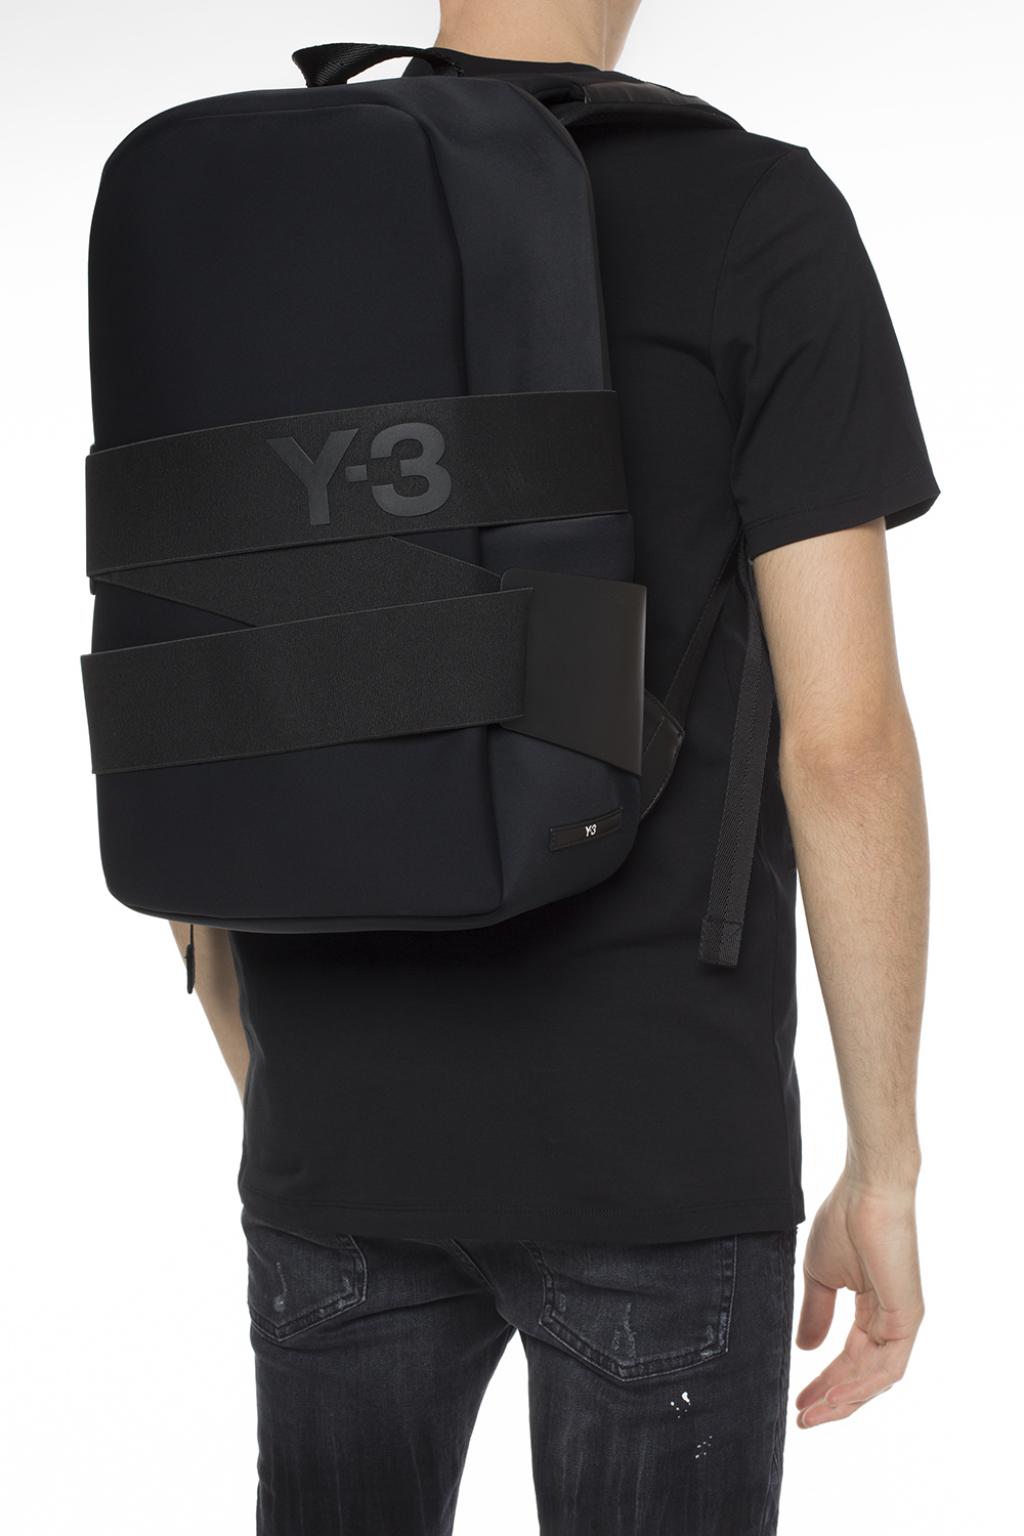 Y-3 QRUSH BACKPACK